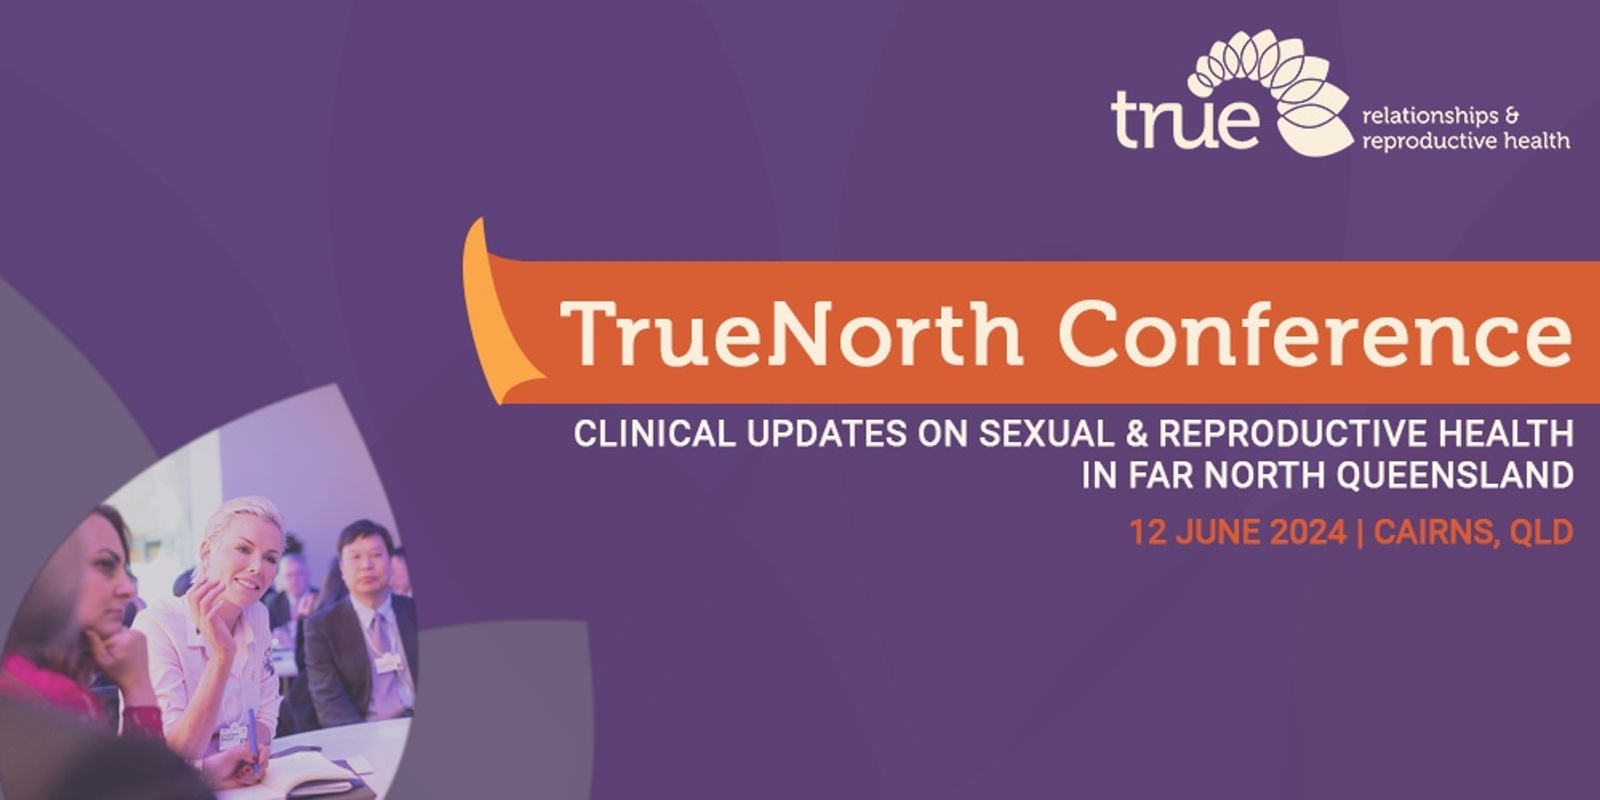 Banner image for TrueNorth Conference: Clinical Updates on Sexual & Reproductive Health in Far North Queensland